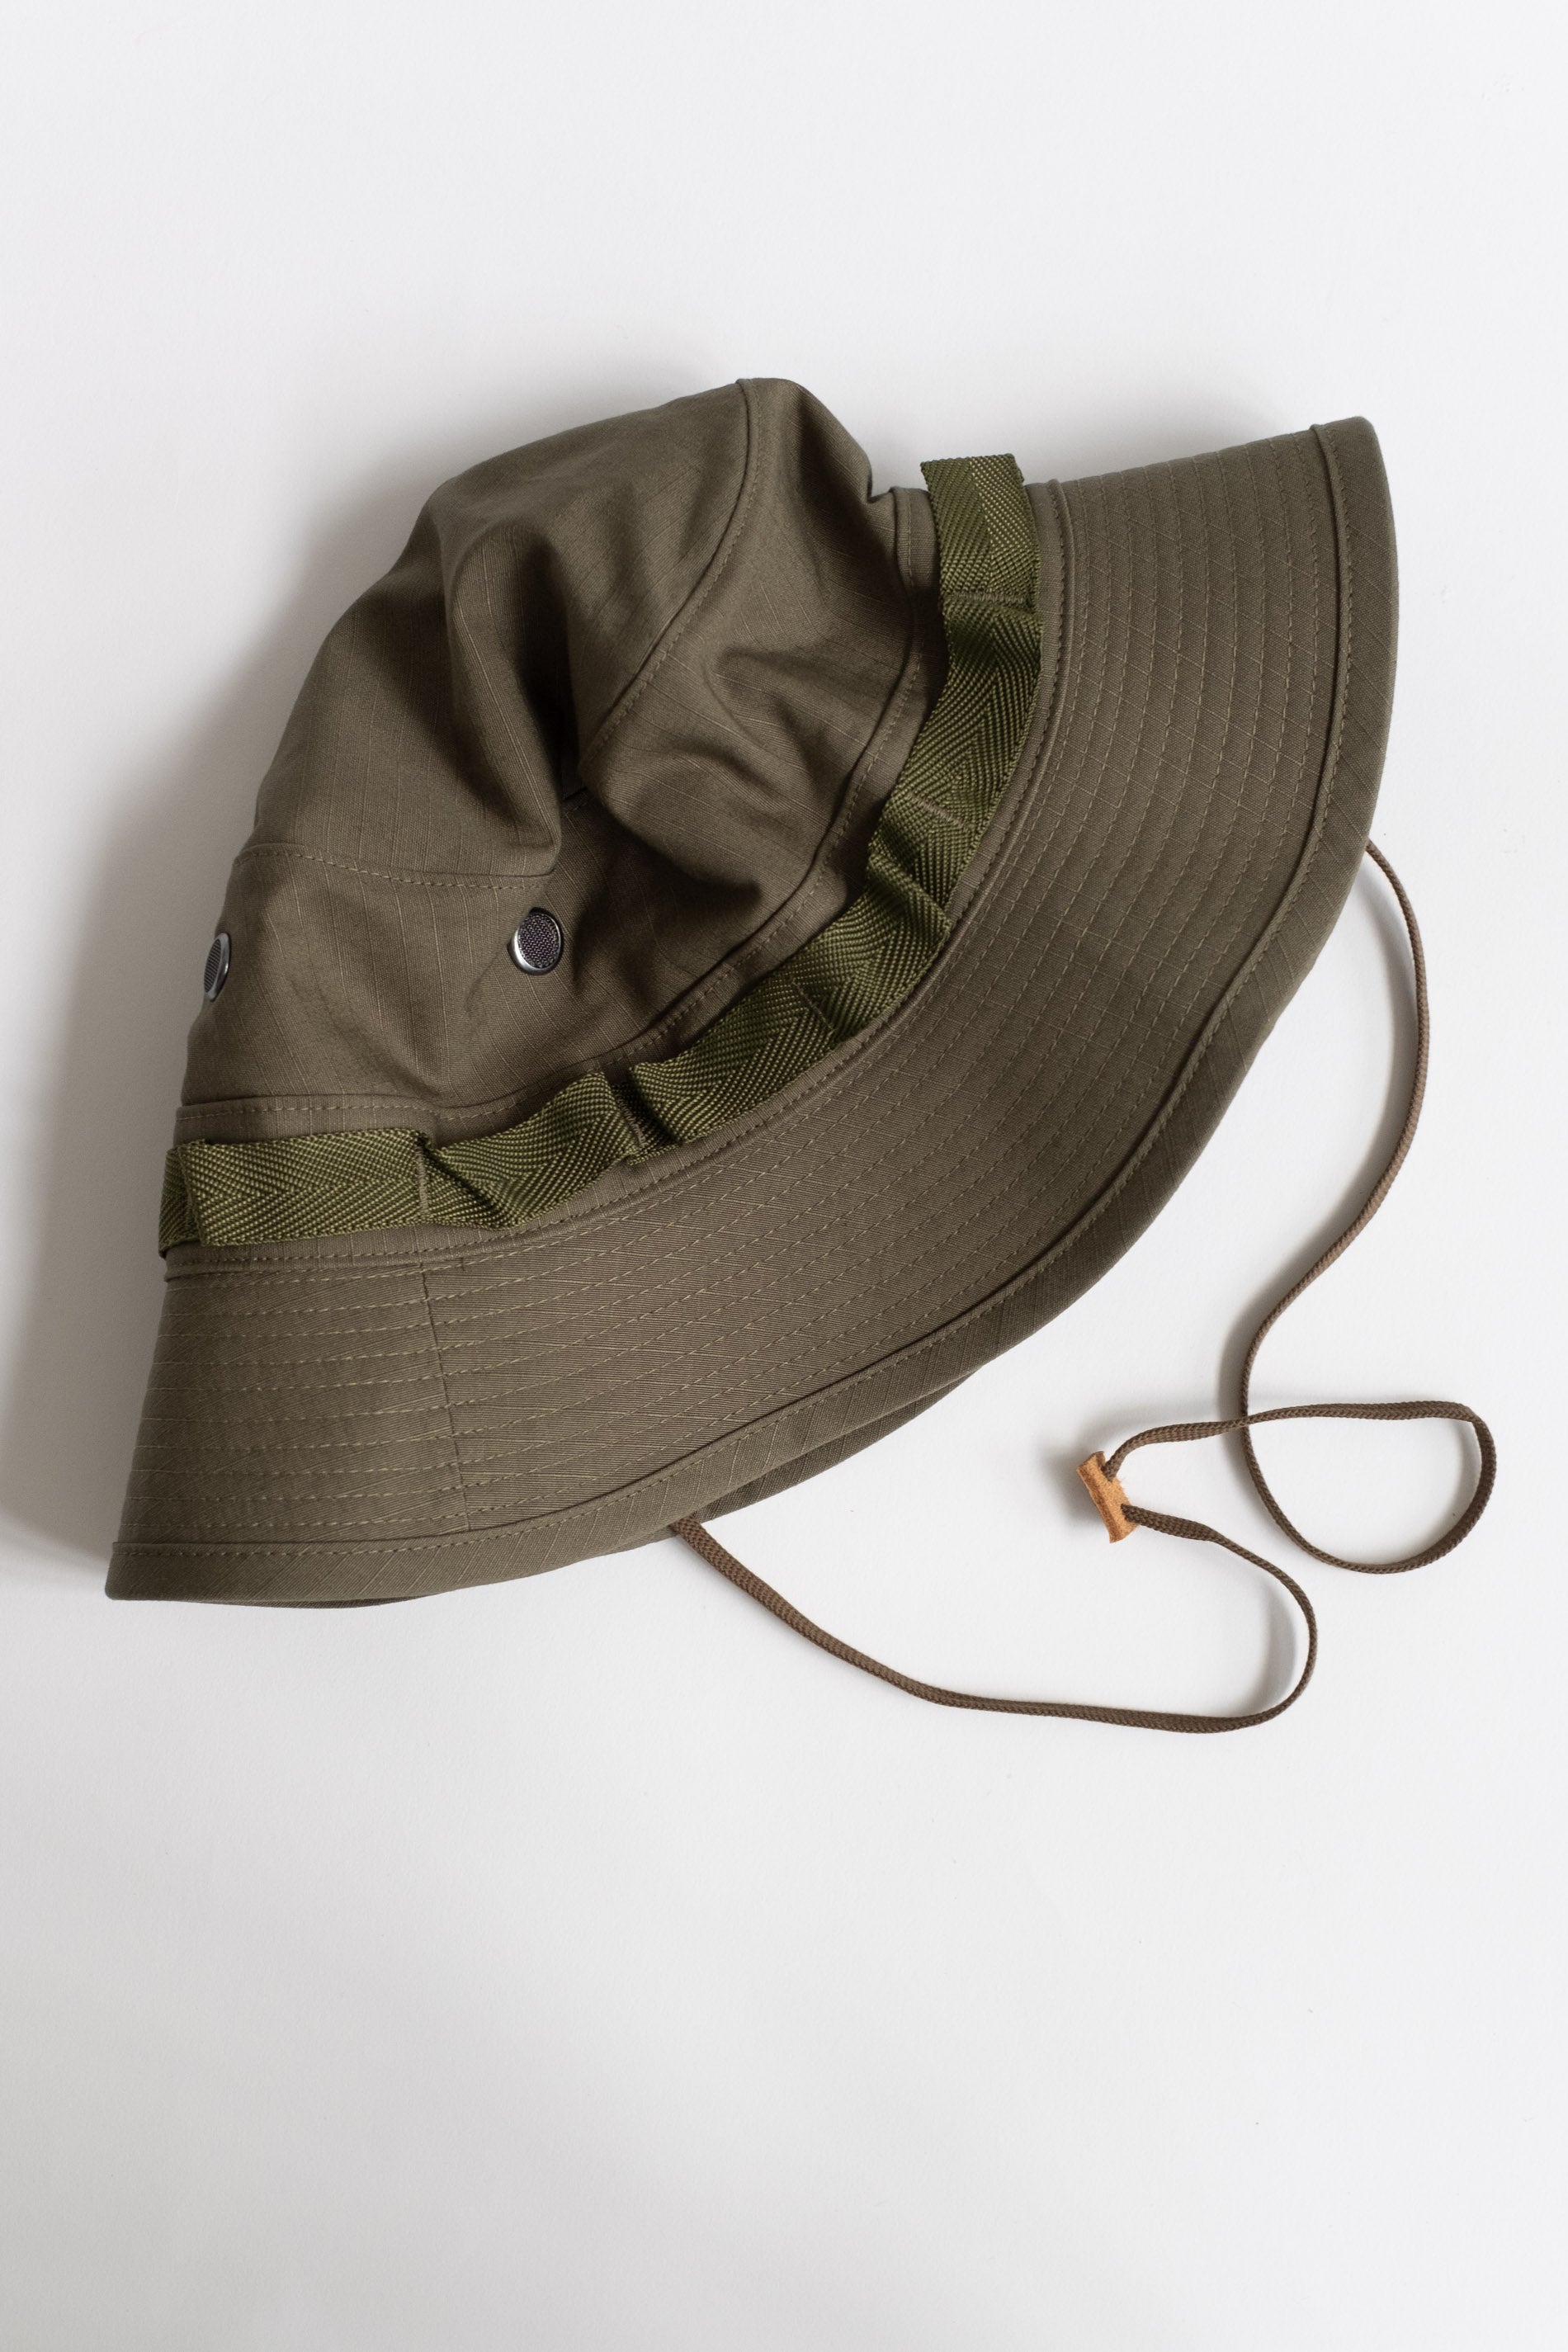 orSlow | US ARMY JUNGLE HAT IN RIPSTOP ARMY GREEN – RELIQUARY